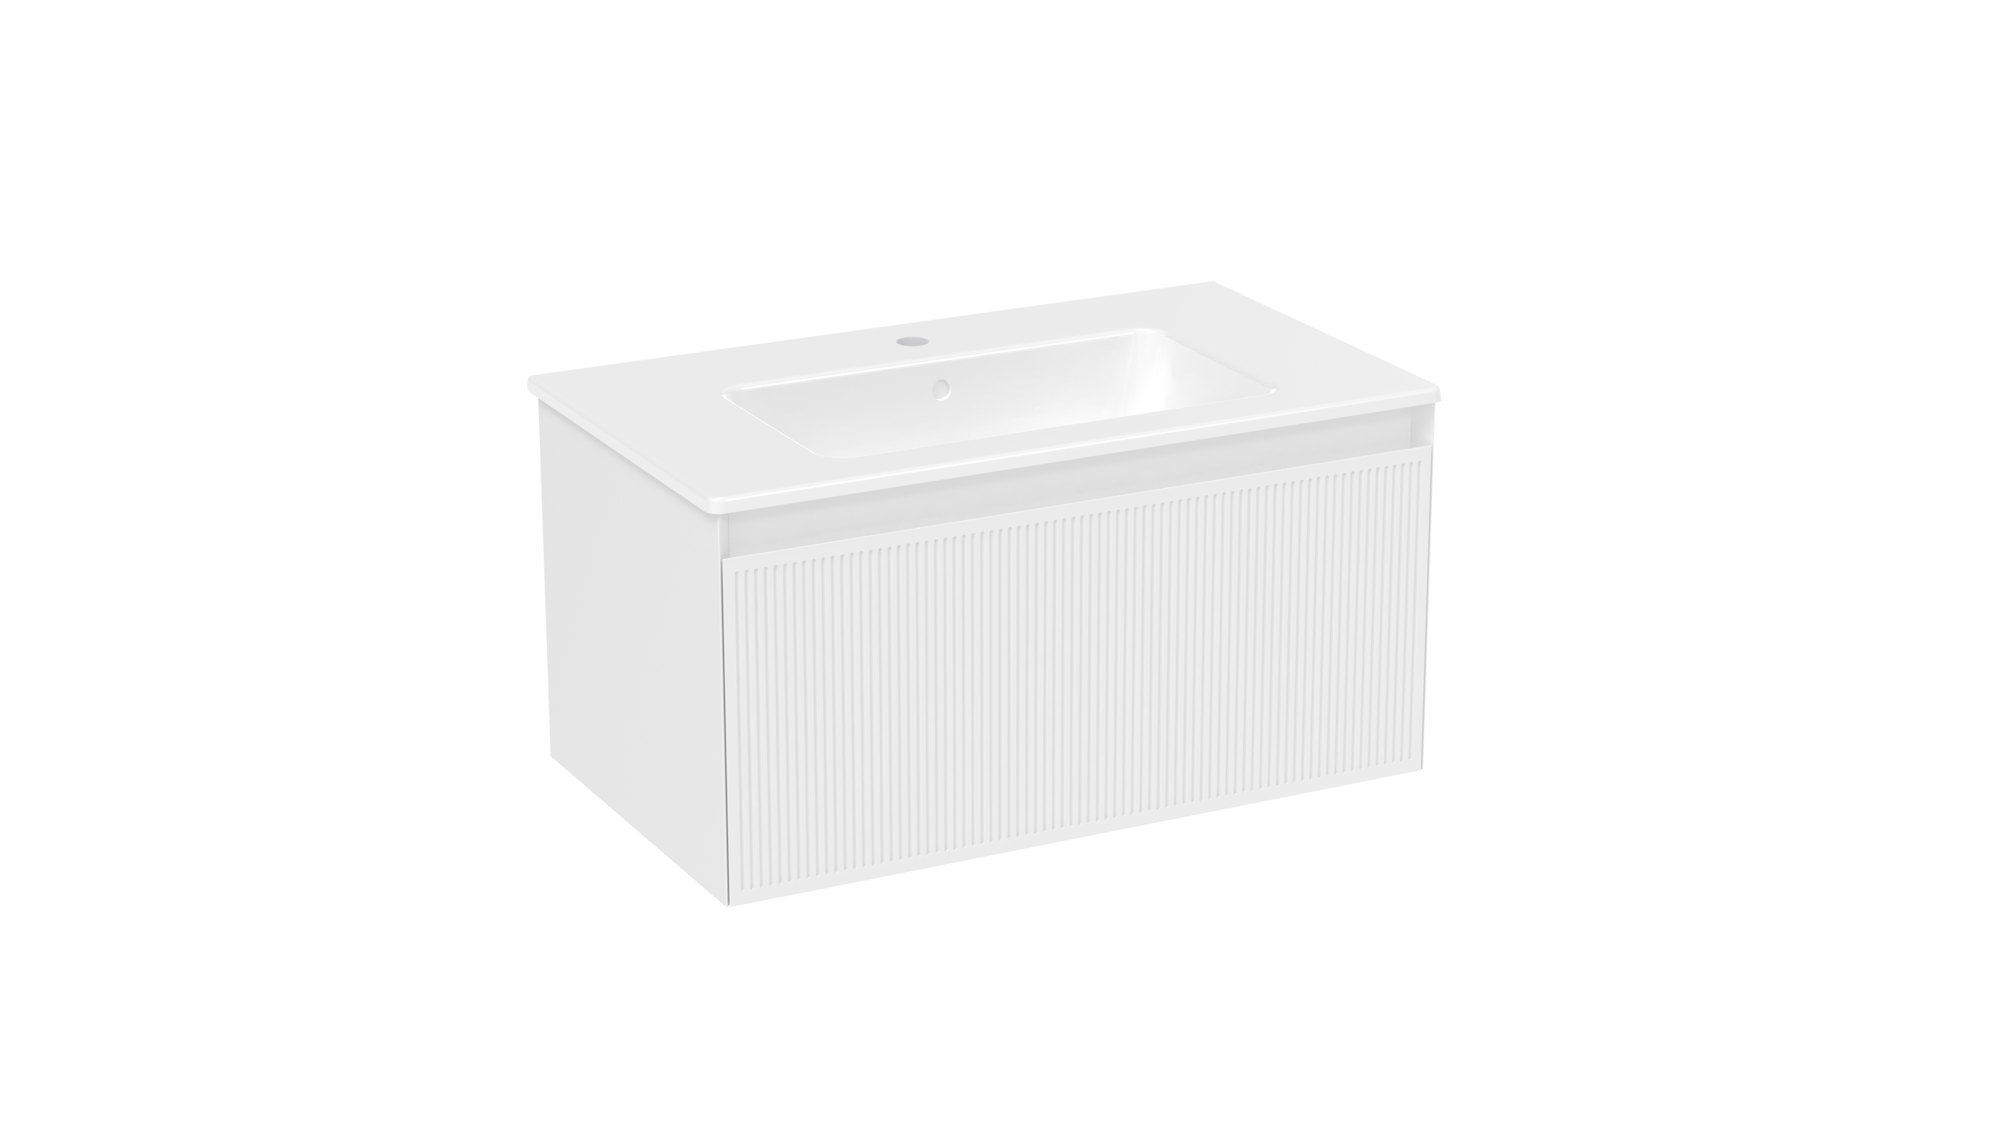 MONUMENT 80cm 1 drawer wall mounted unit - Matte White